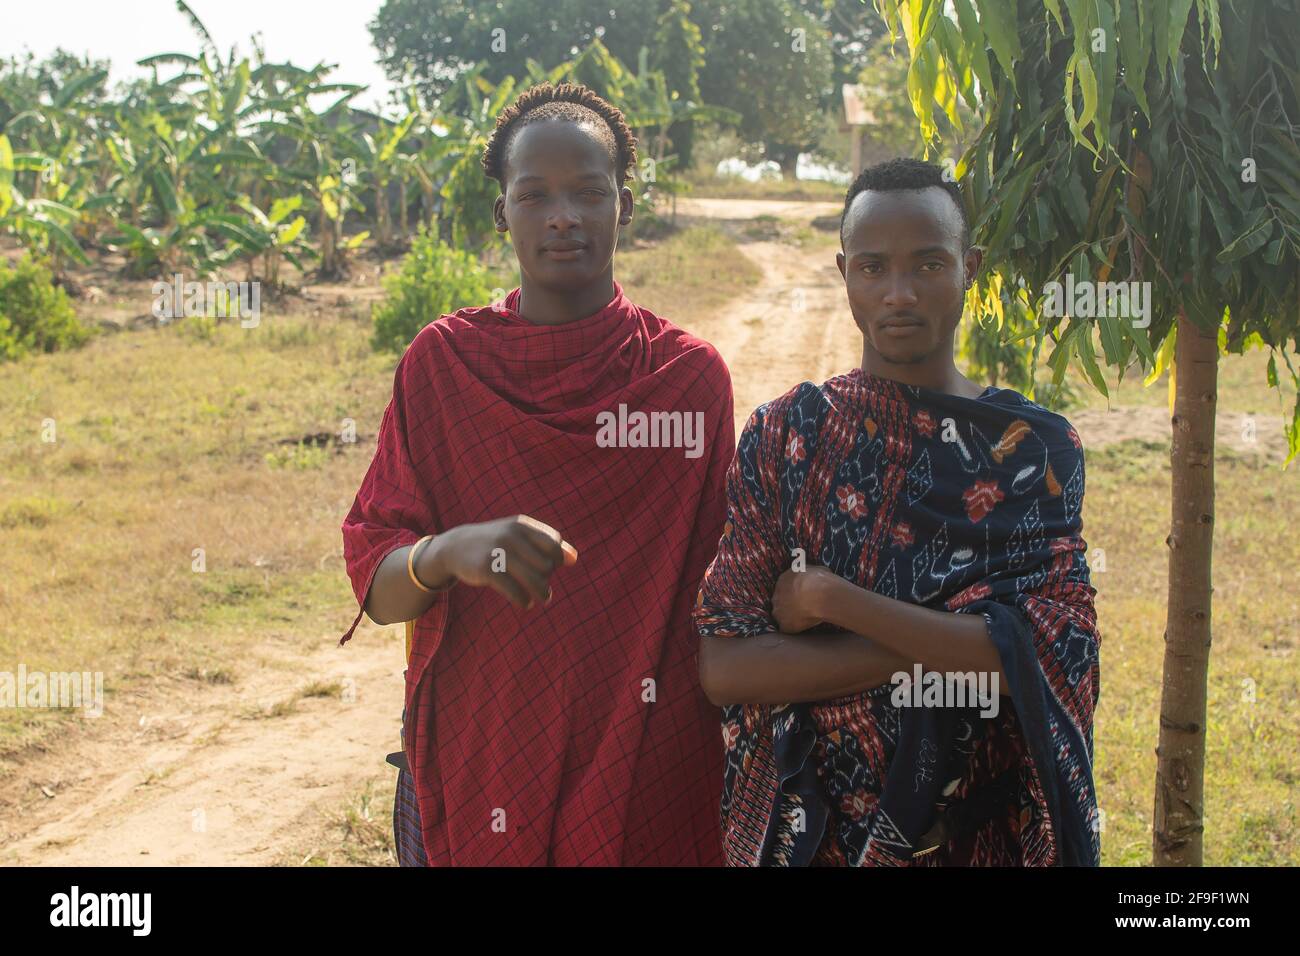 Dodoma, Tanzania. 08-18-2019. Portrait of two black young male farmers, from maasai ethnic group, working as security for a local school in Tanzania. Stock Photo